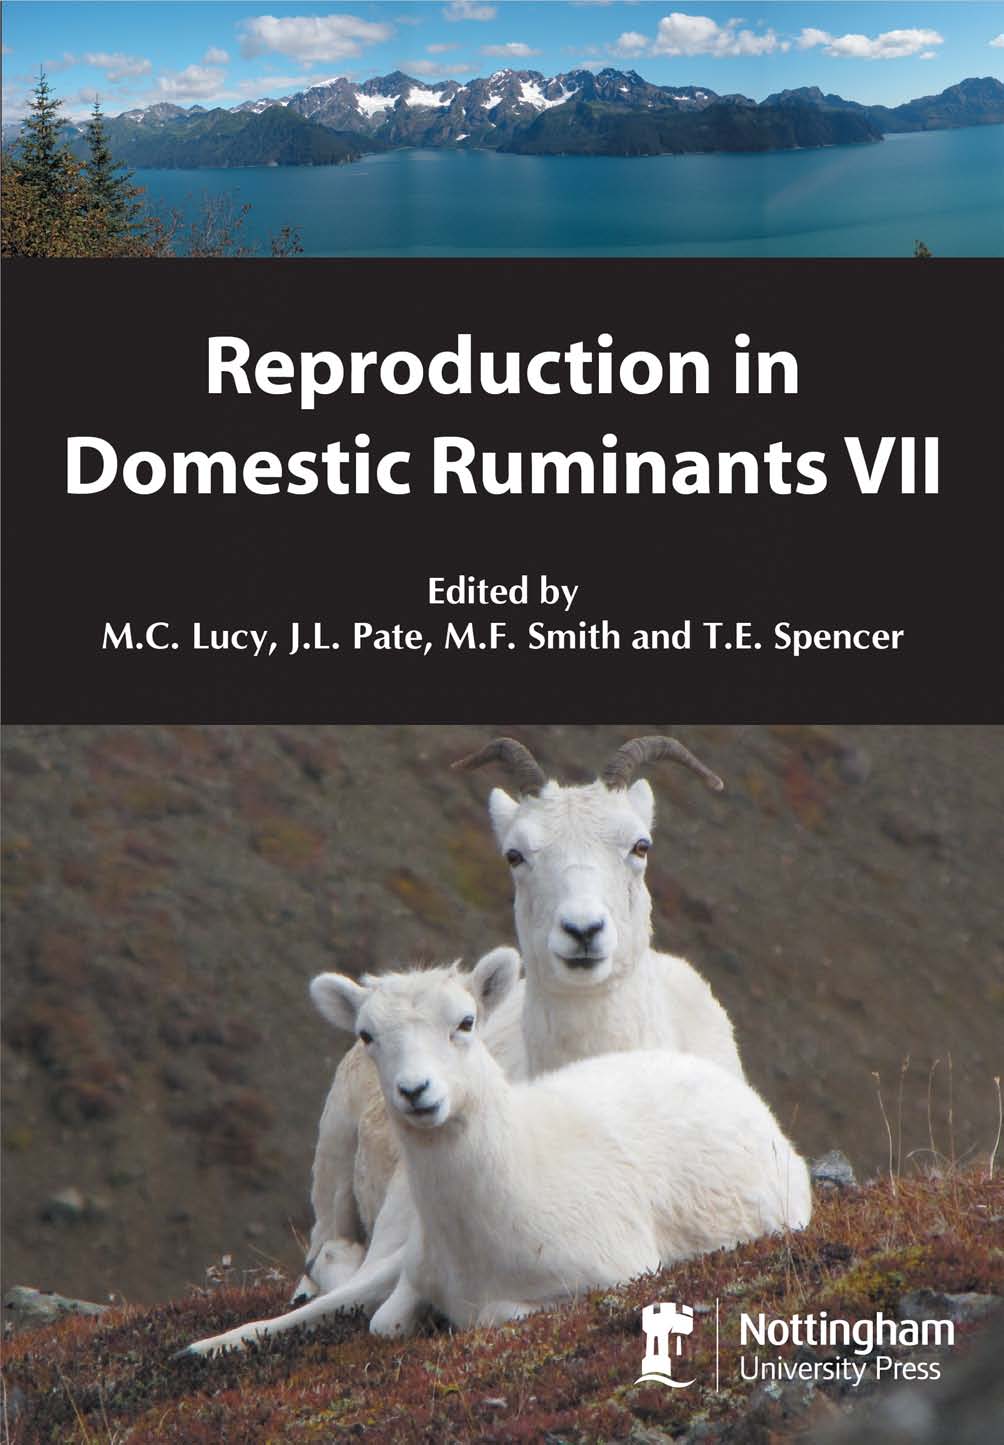 Reproduction in Domestic Ruminants VII | VetBooks